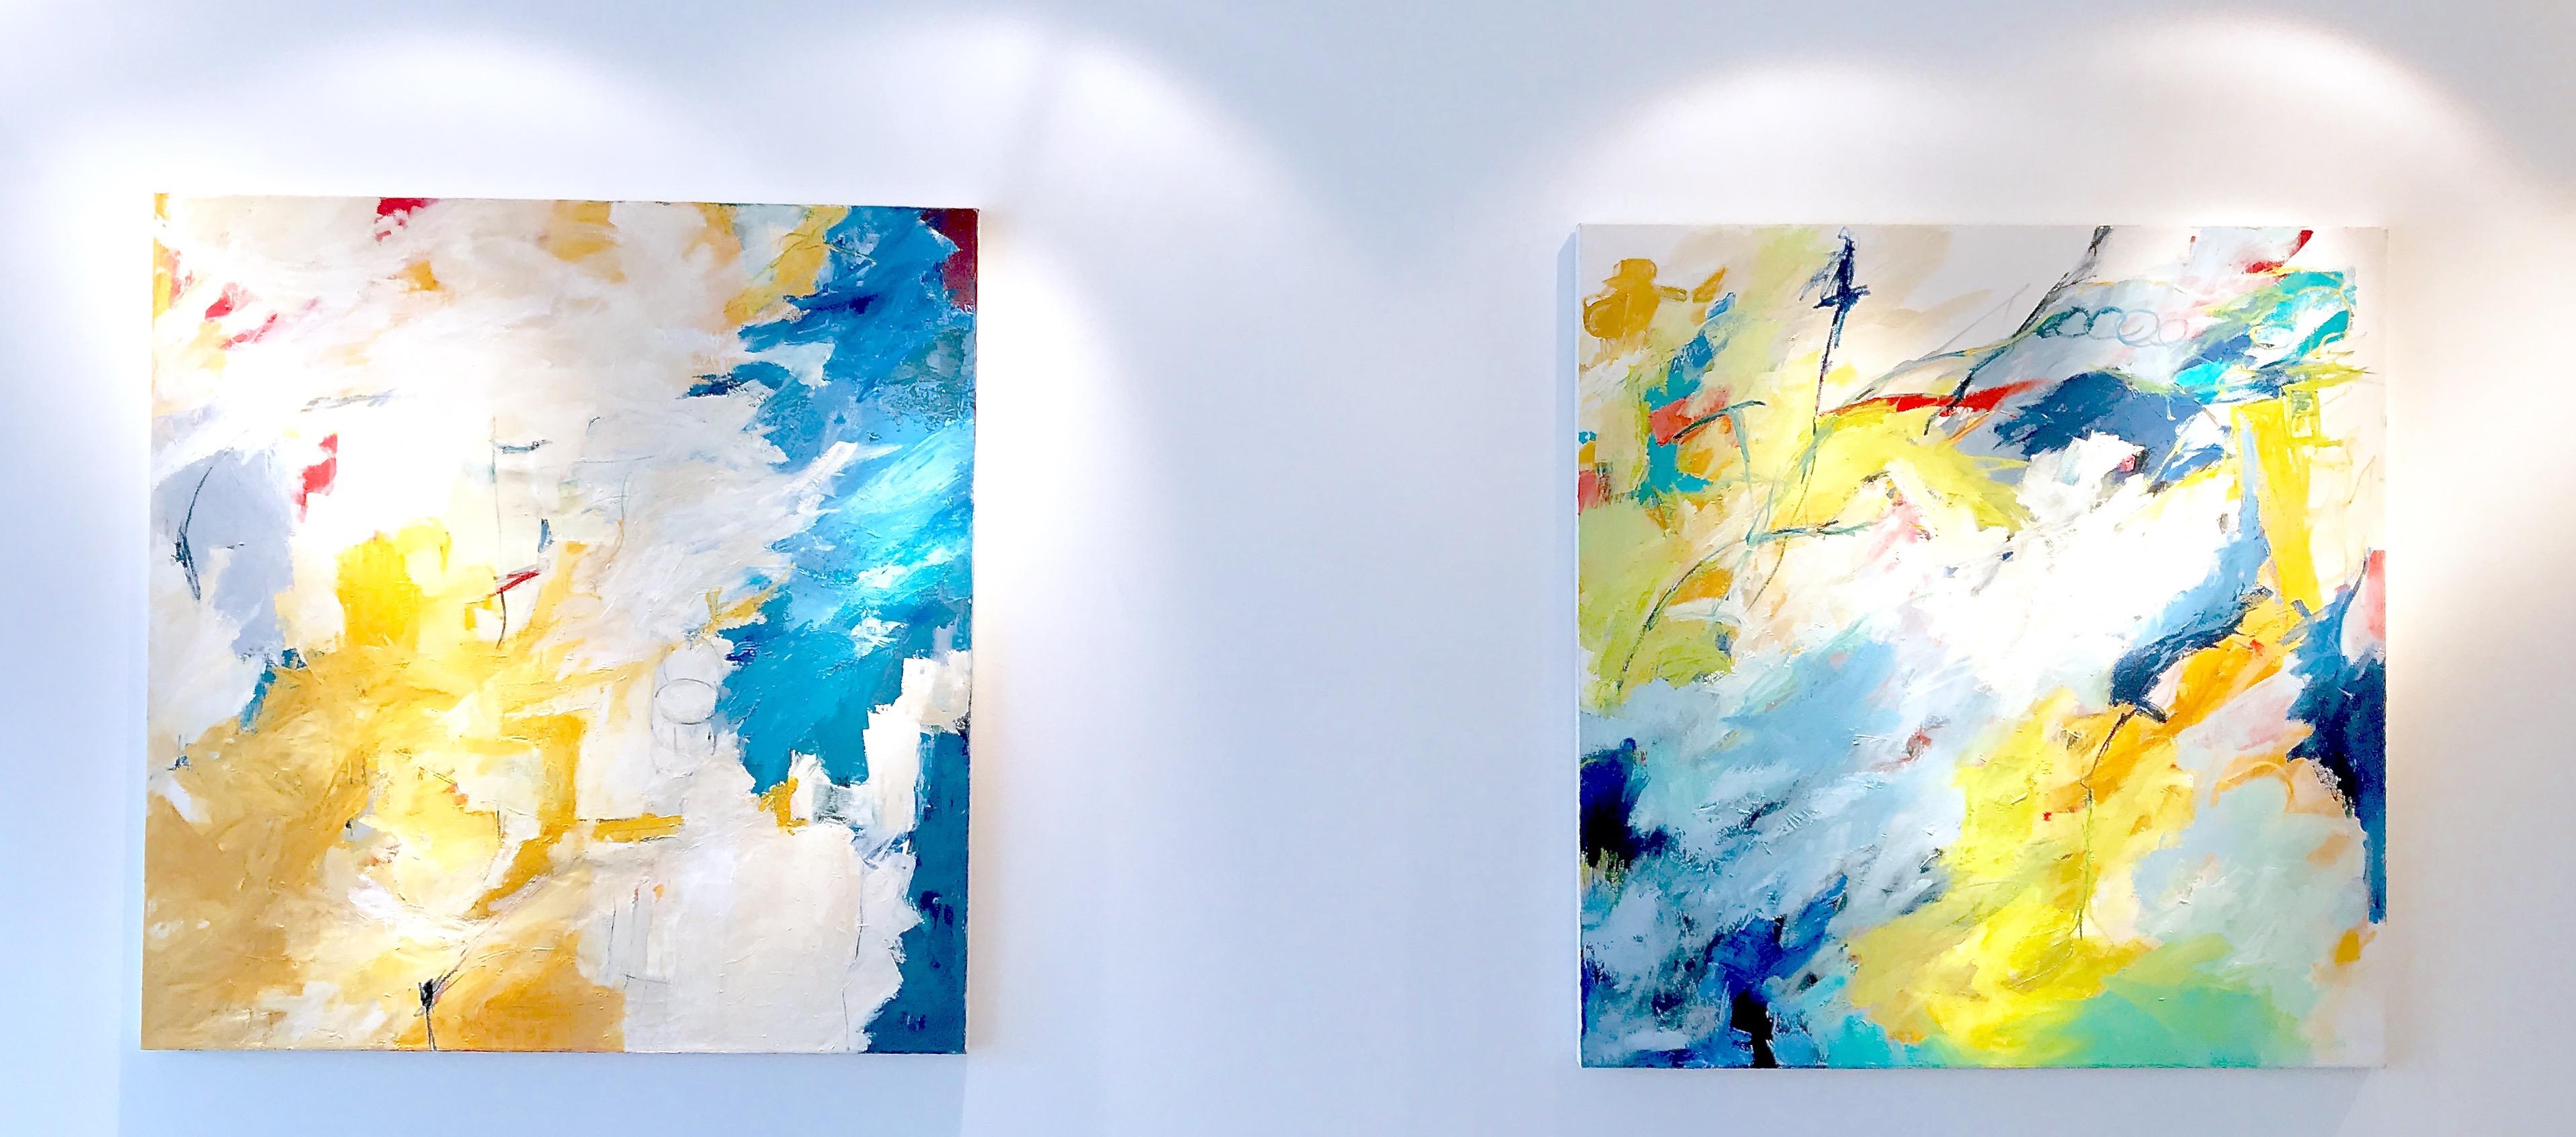 
Serene Abstract Expressionist painting with lovely light in white, blue, lavender, yellow, red and black.

